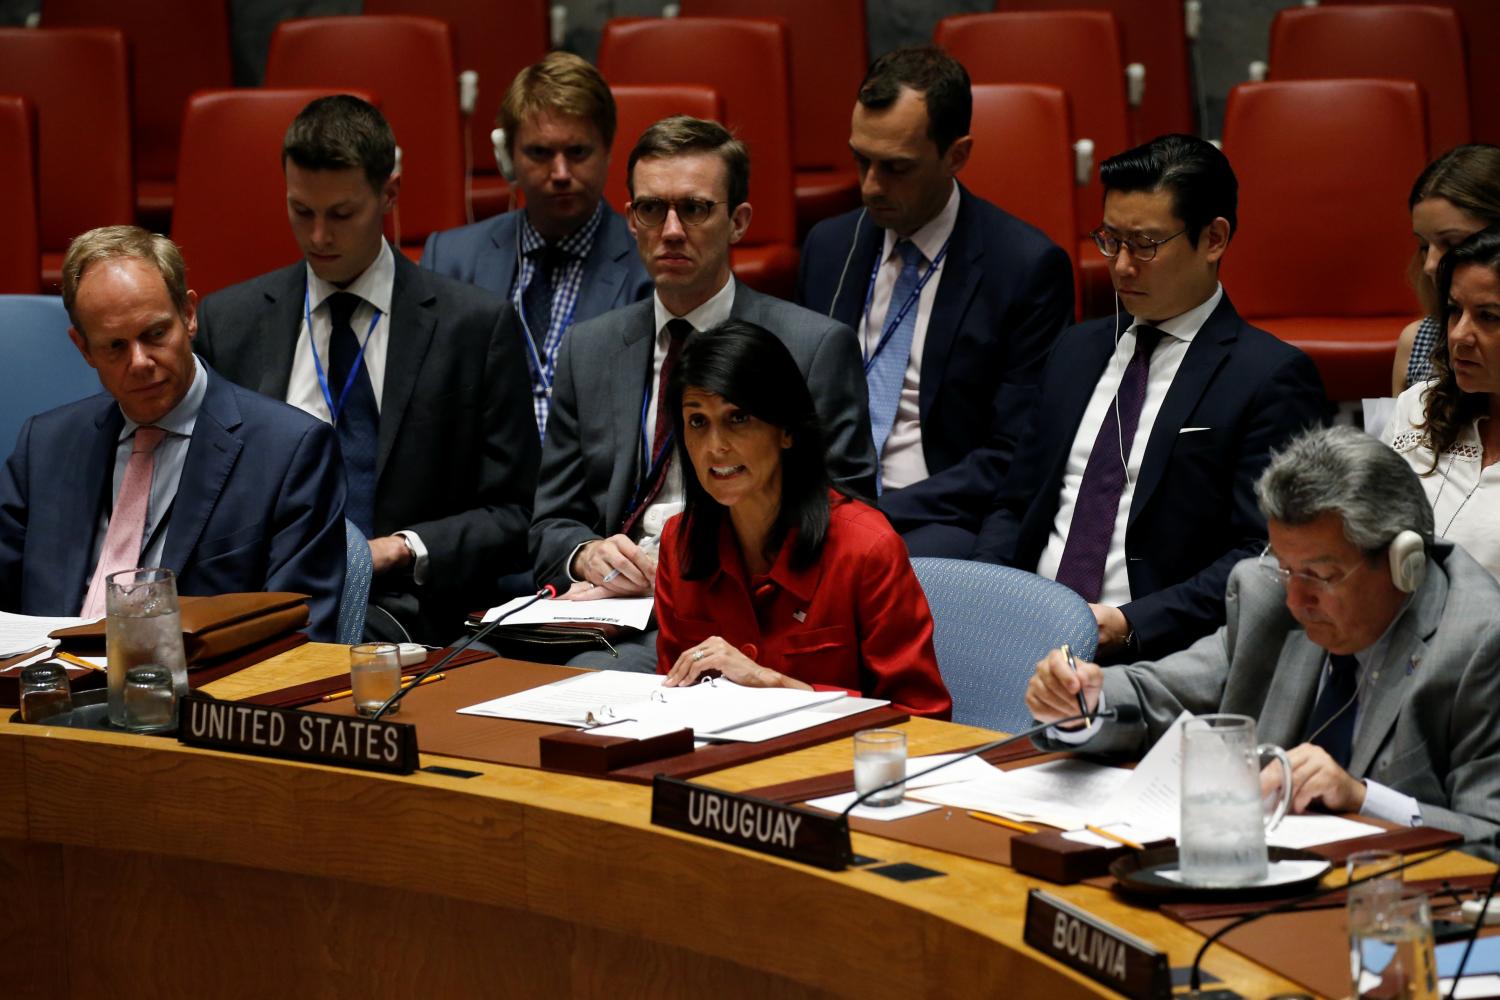 U.S. Ambassador Nikki Haley addresses the U.N. Security Council as it meets to discuss the recent ballistic missile launch by North Korea.